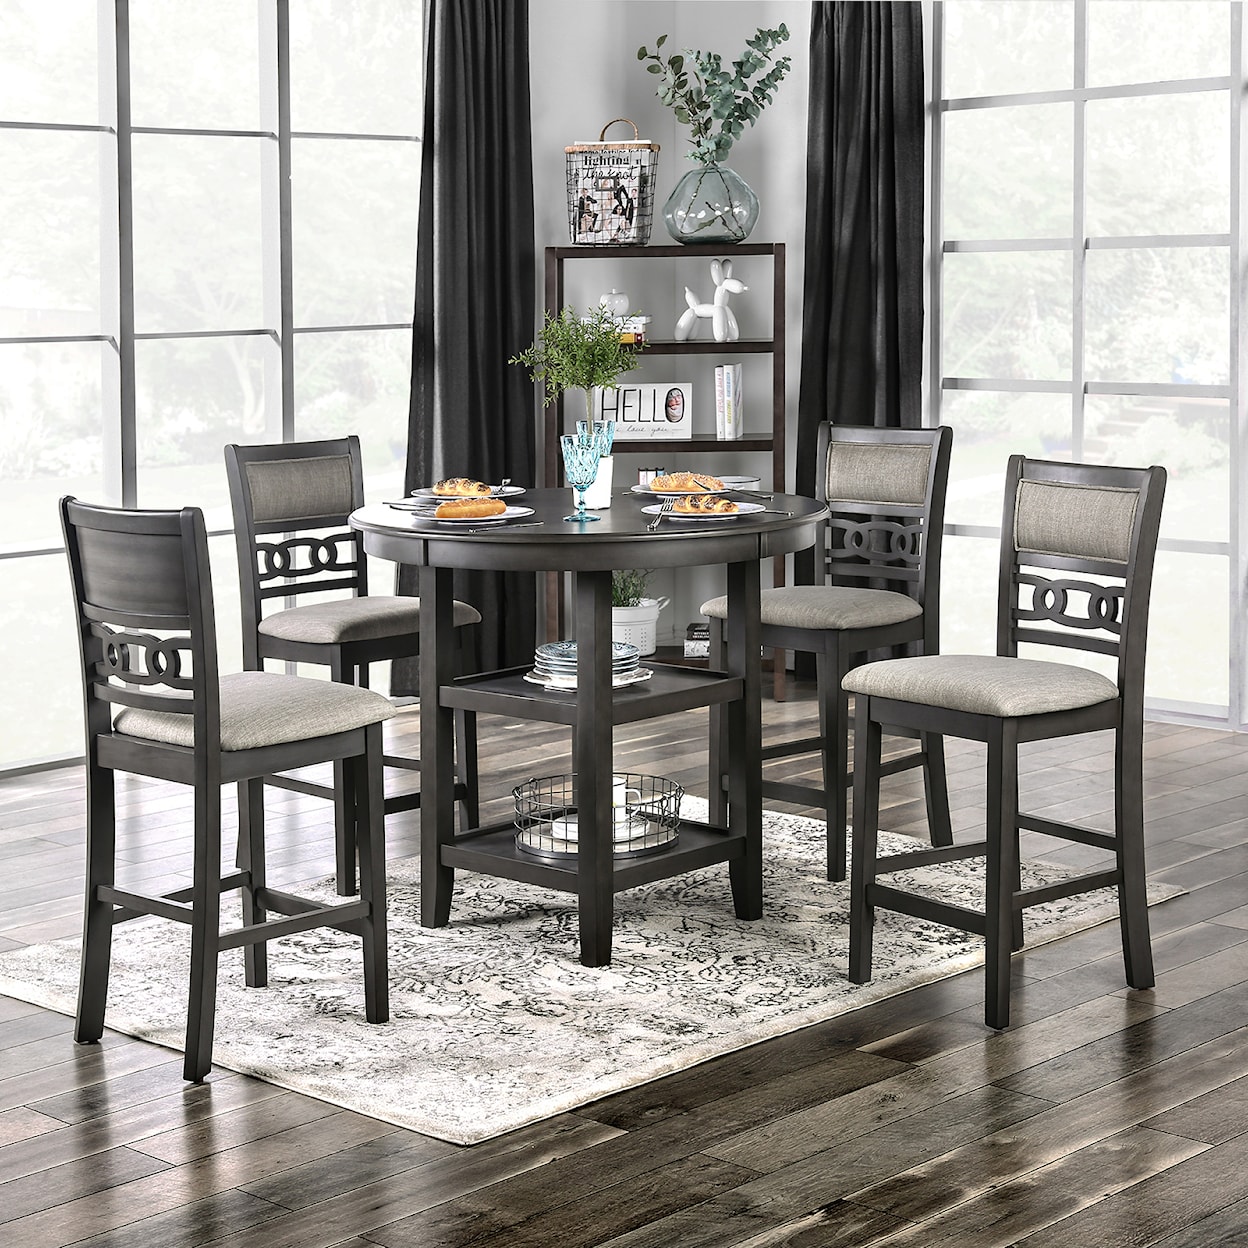 FUSA Milly Counter Height Dining Set